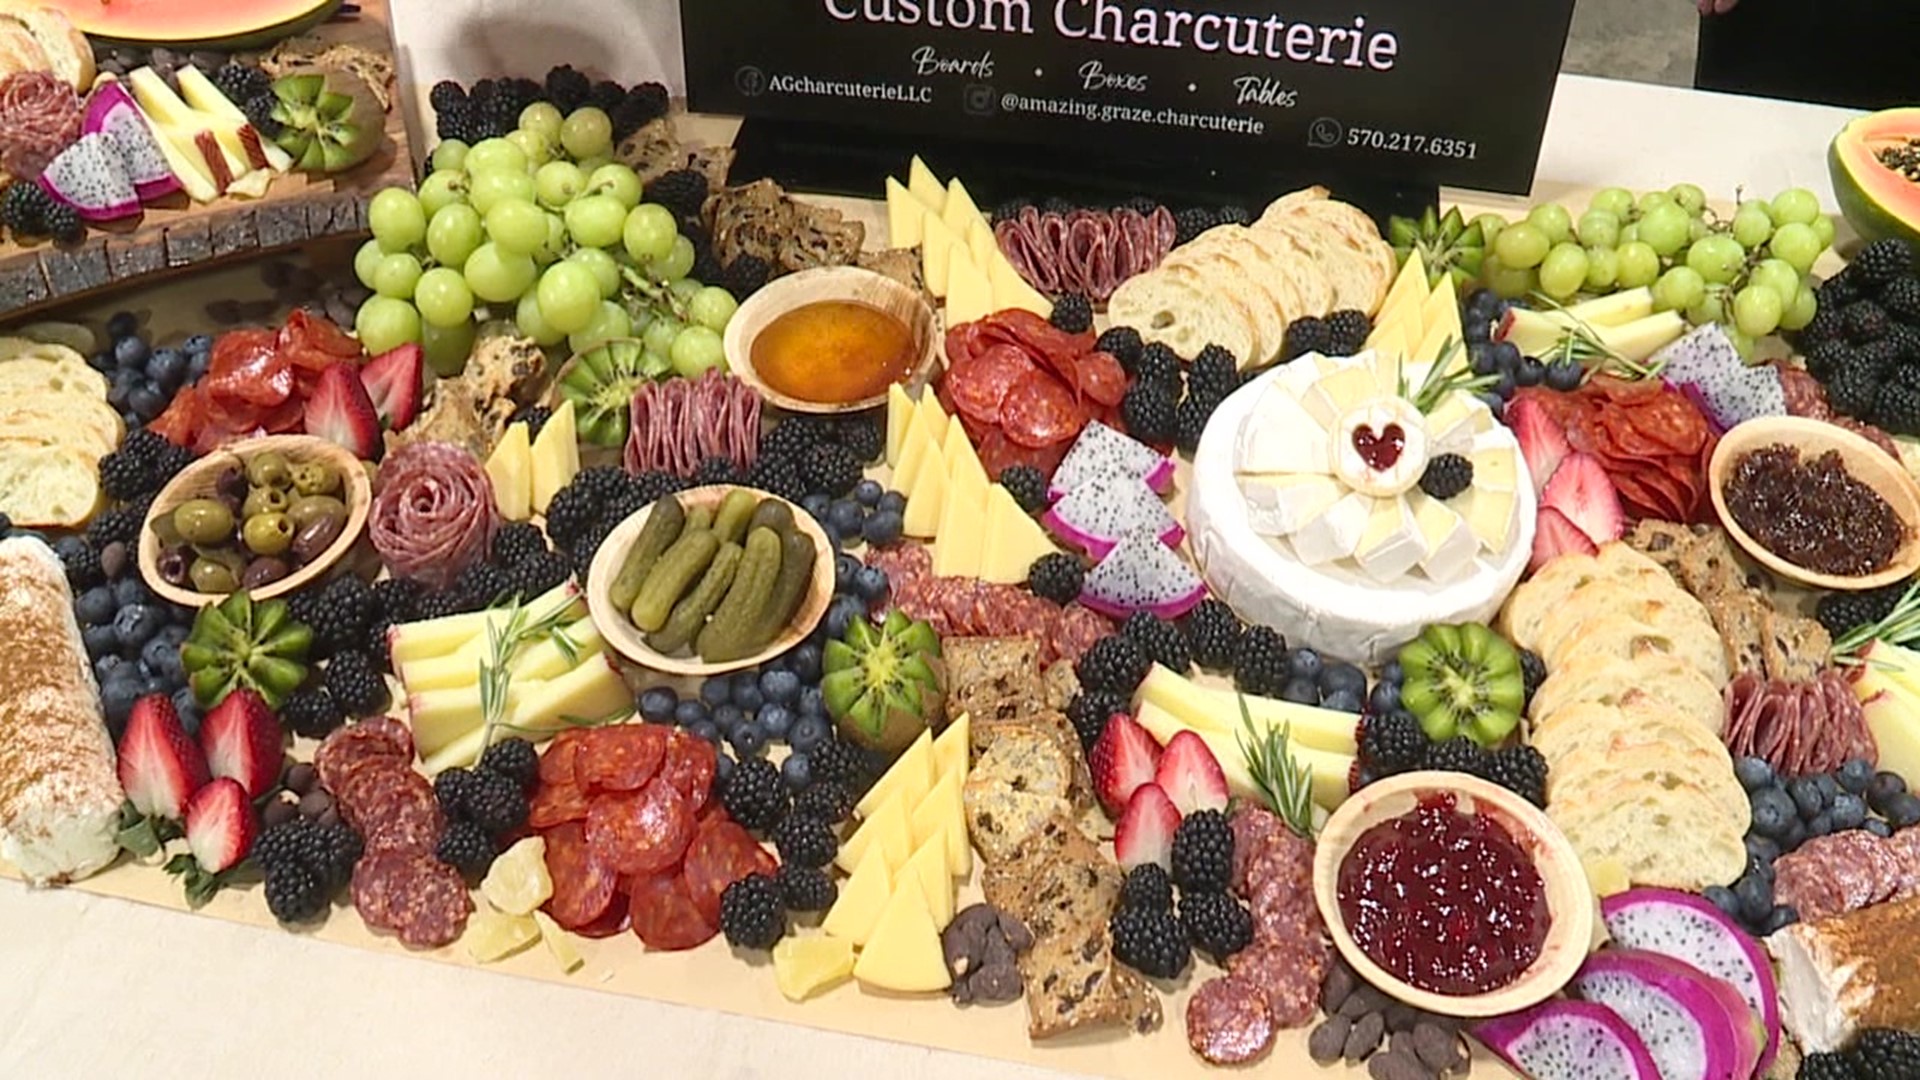 Charcuterie business started during pandemic